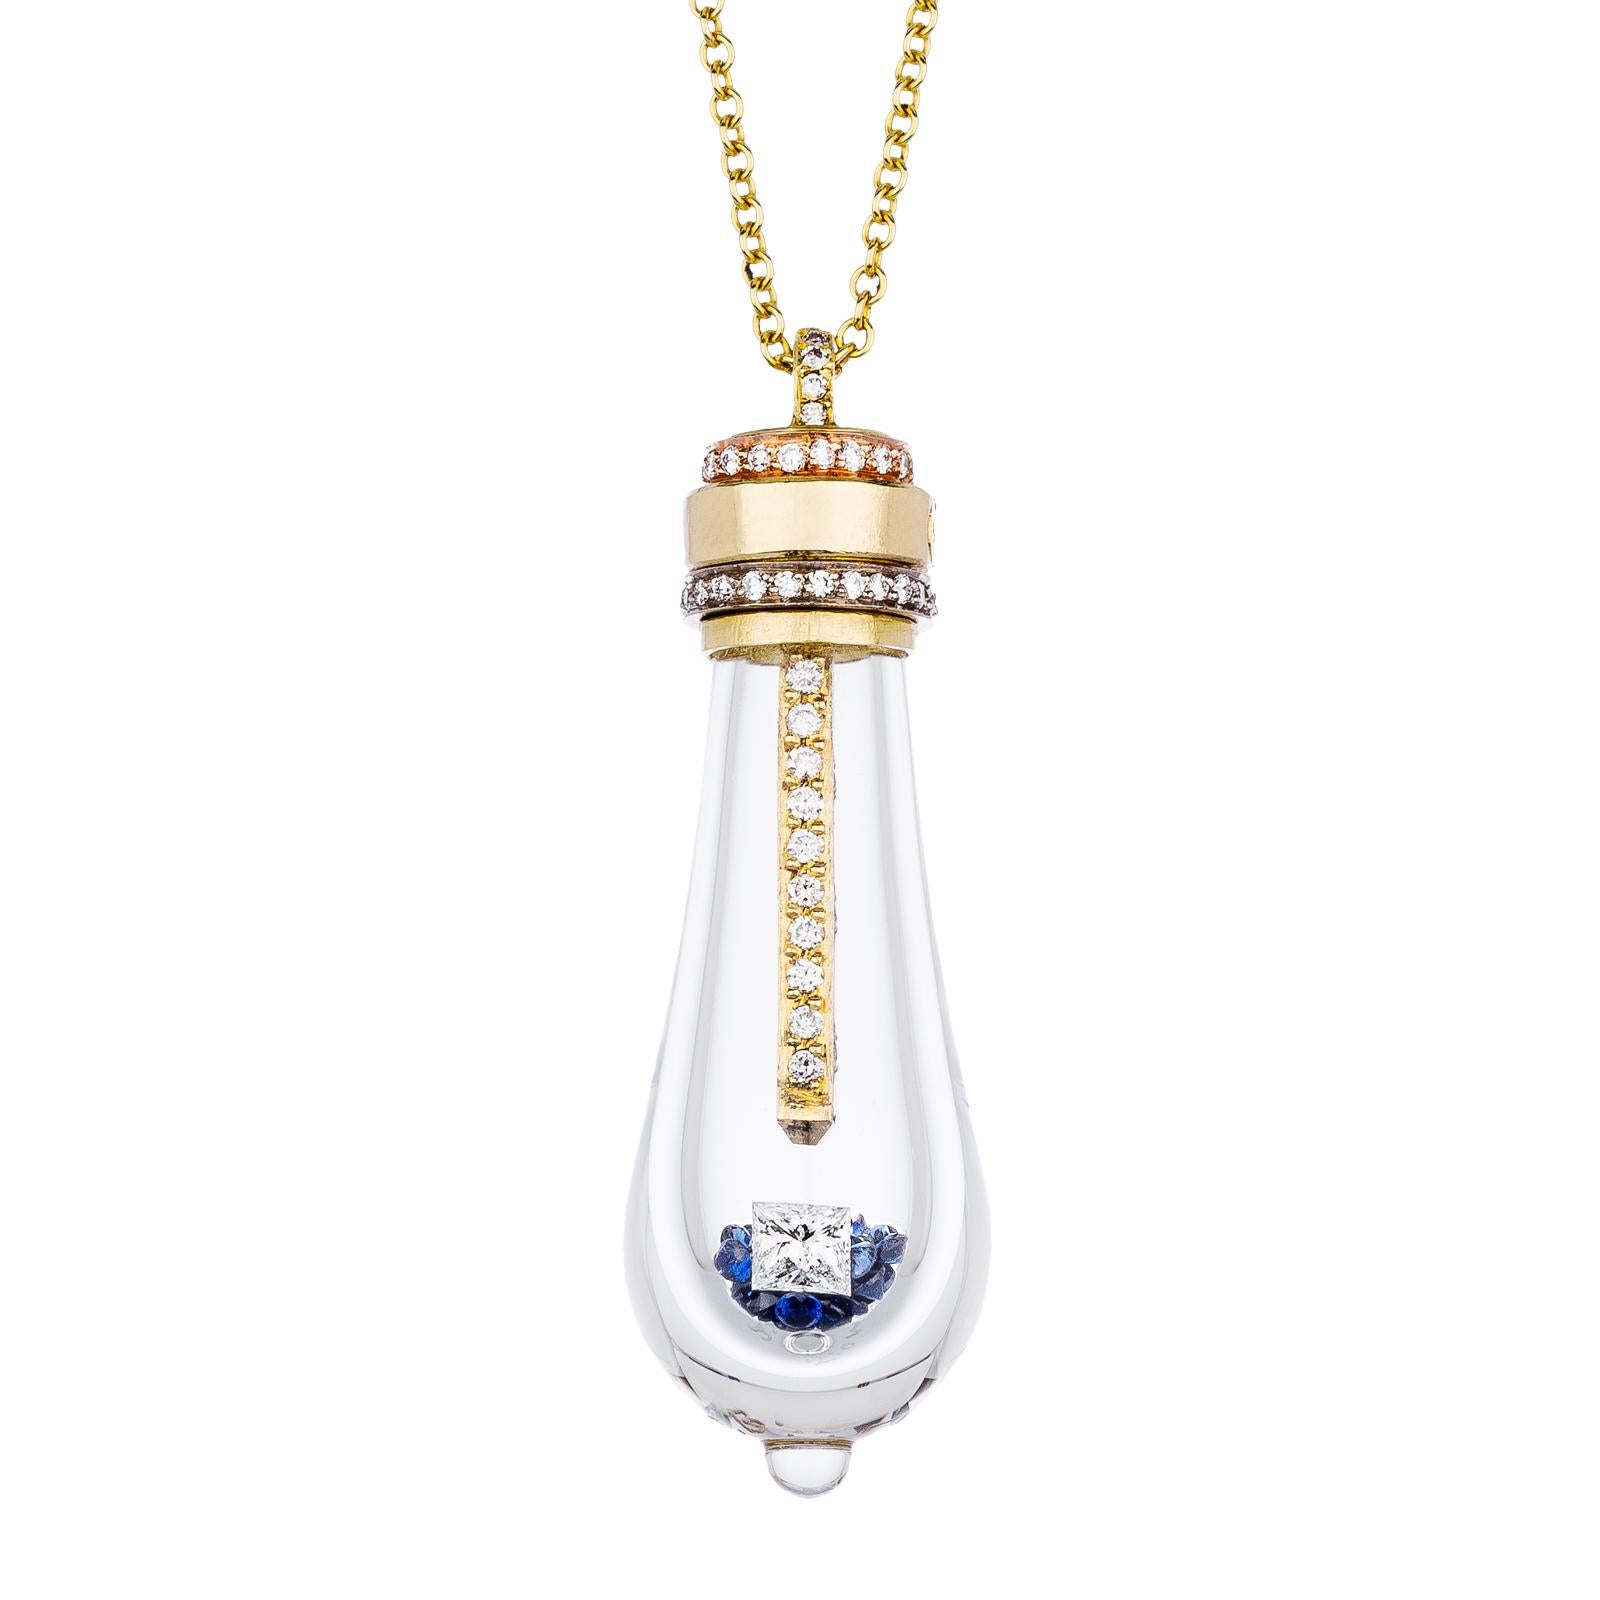 18k Lightkeeper Necklace features a large hand blown glass bulb with white diamond pave in the center filament, white diamond pave halo around the two tone yellow and rose gold top, filled with 50 blue sapphires, 1 princess cut white diamond, set in